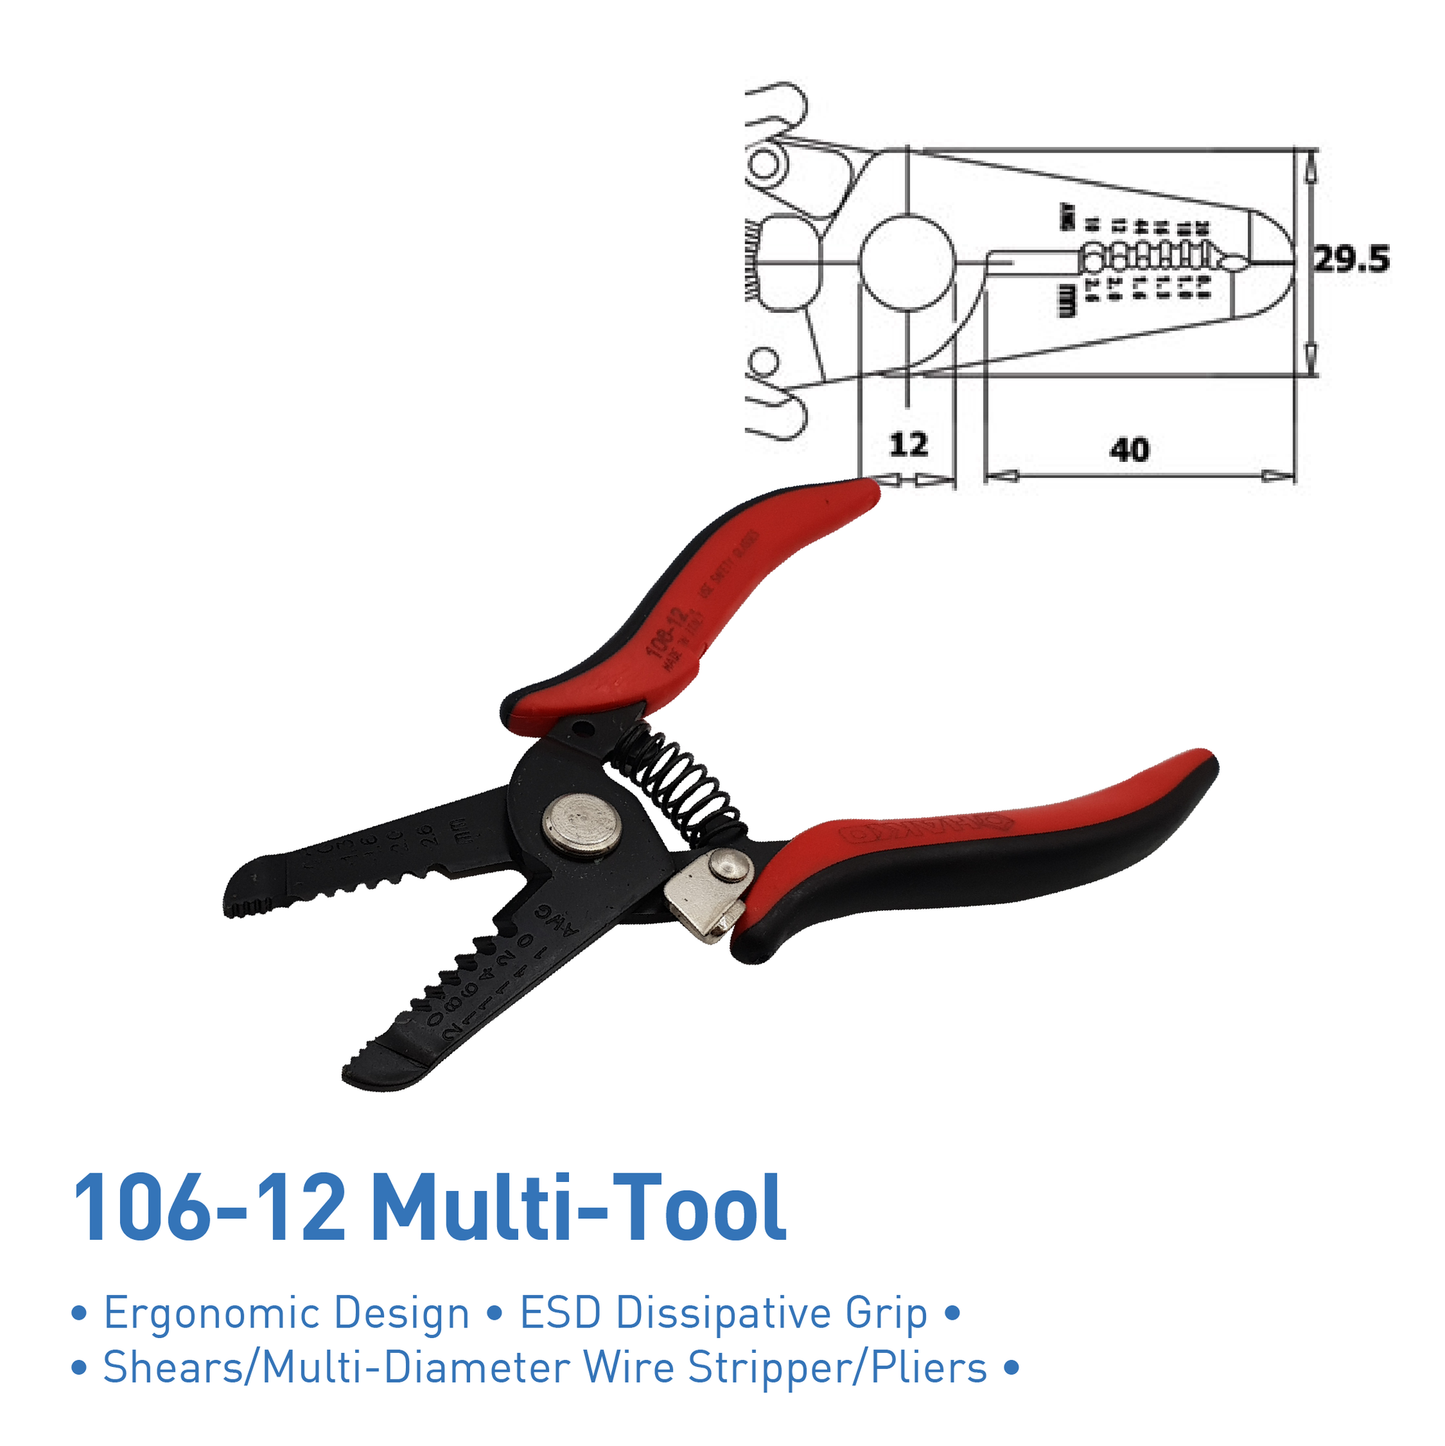 HAKKO multi tool 106-12 shears, multi-diameter wire stripers, pliers. Recommended for copper and lead wires,ESD dissipative grip and ergonomic design. made in italy.